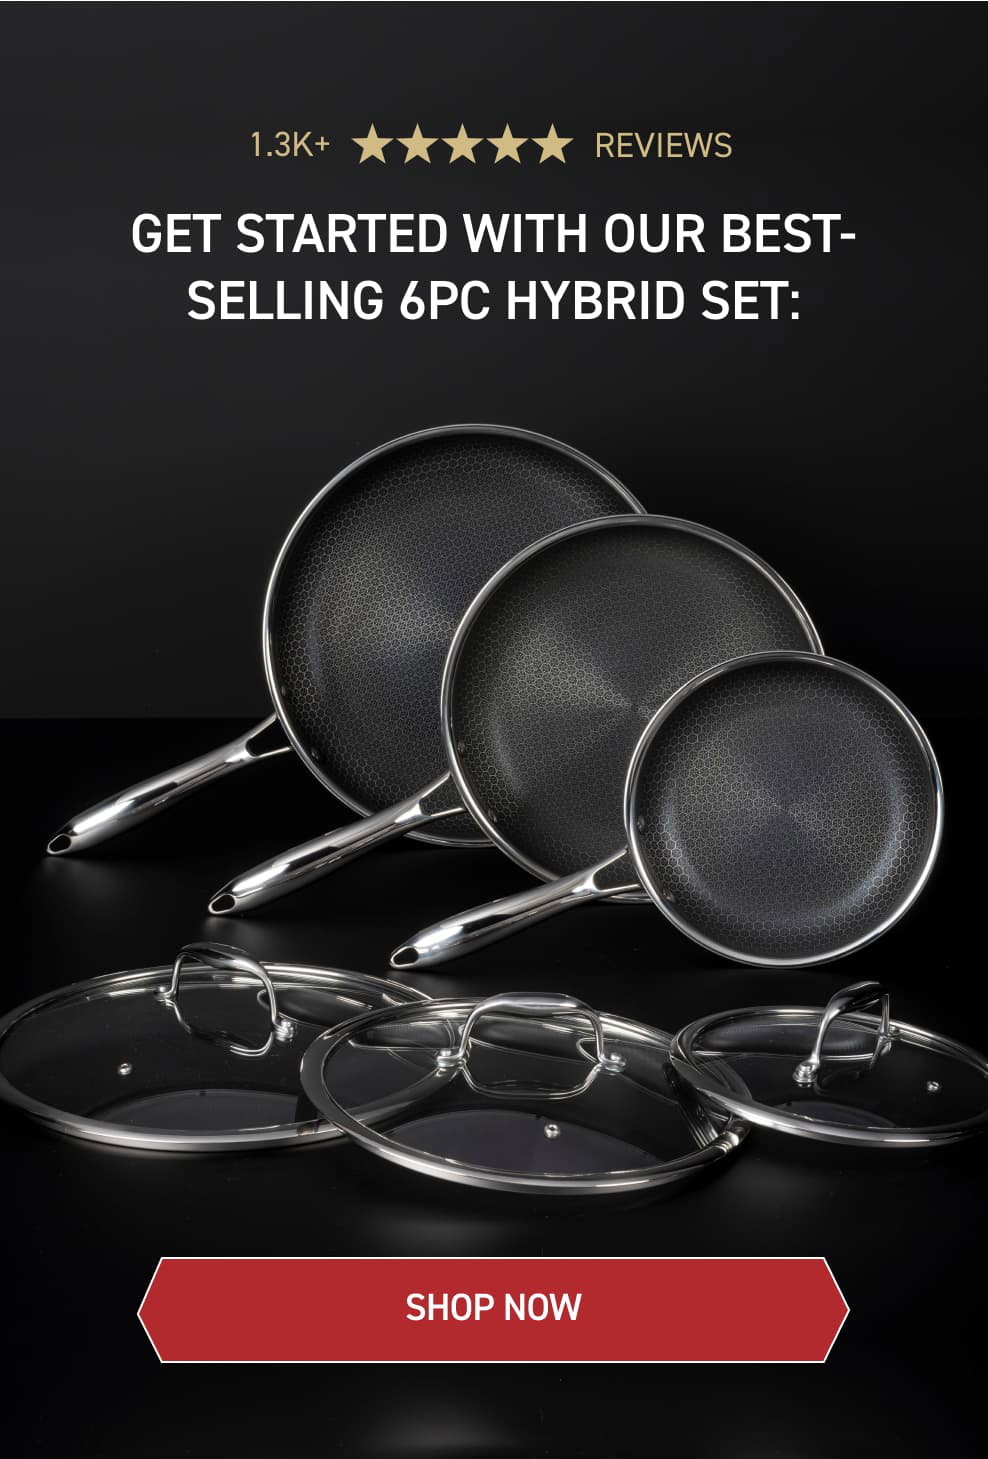 Announcing the HexClad 5 QT Saucepan. The perfect in-between size